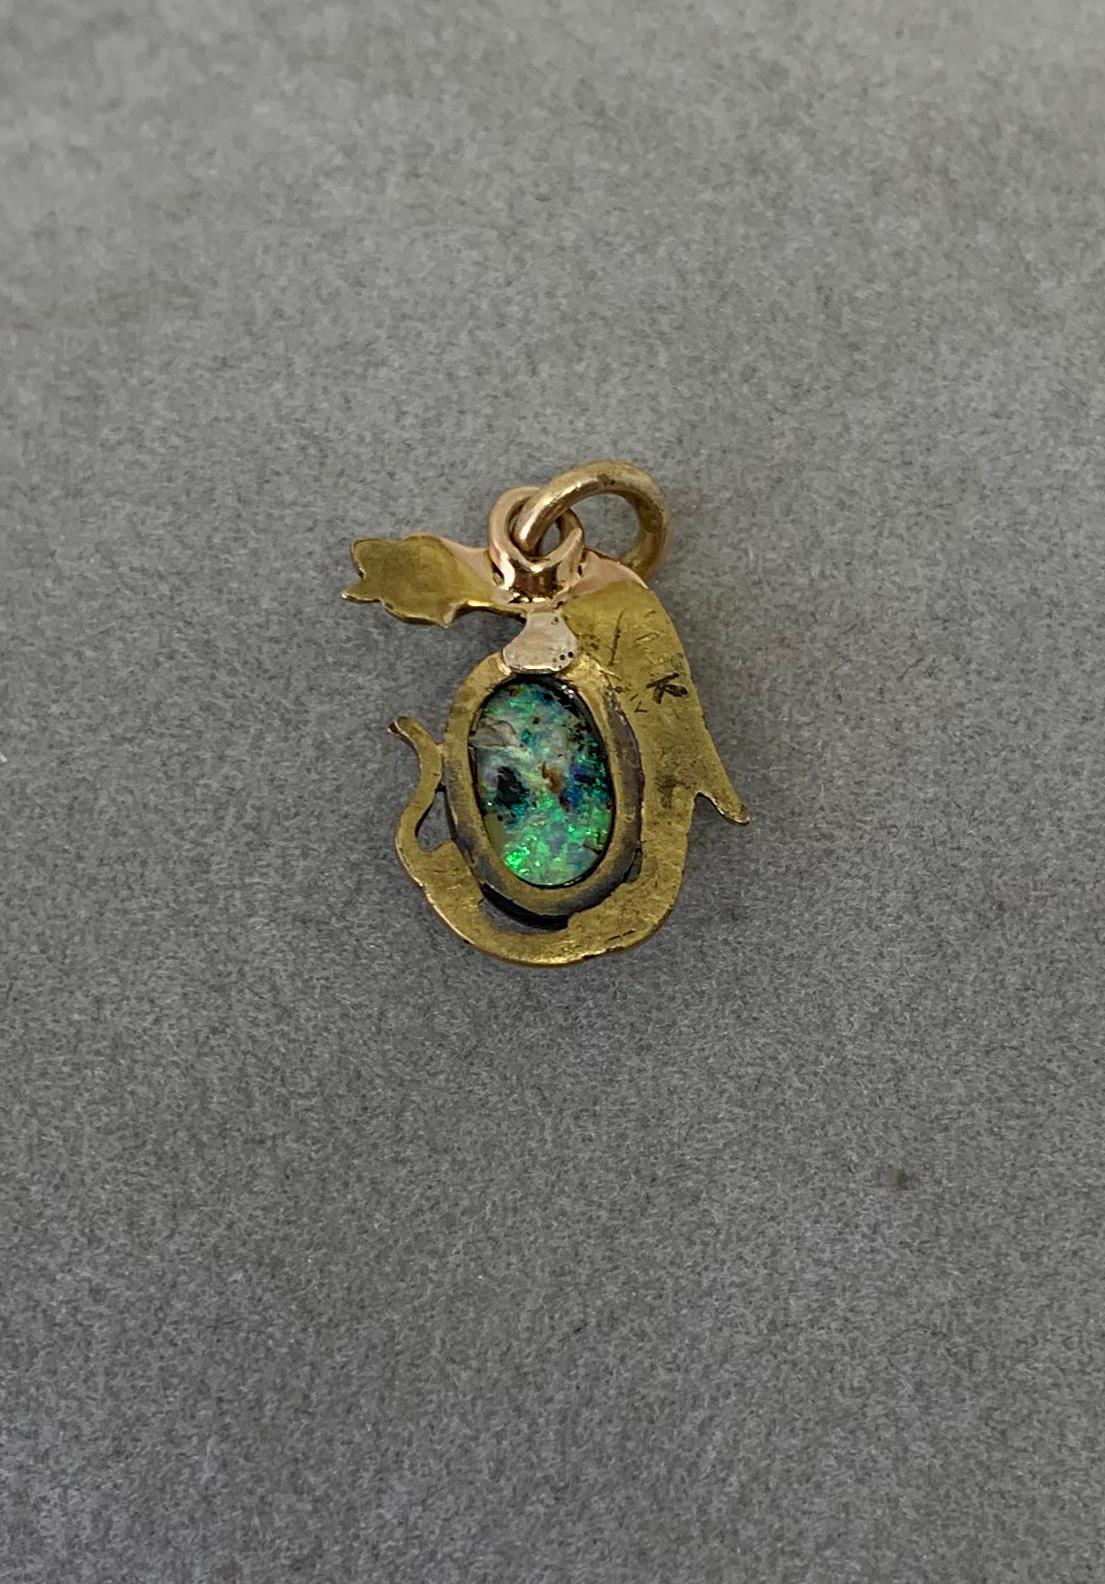 Griffin Dragon Black Opal Pendant Necklace Antique Belle Epoque 14 Karat Gold In Good Condition For Sale In New York, NY